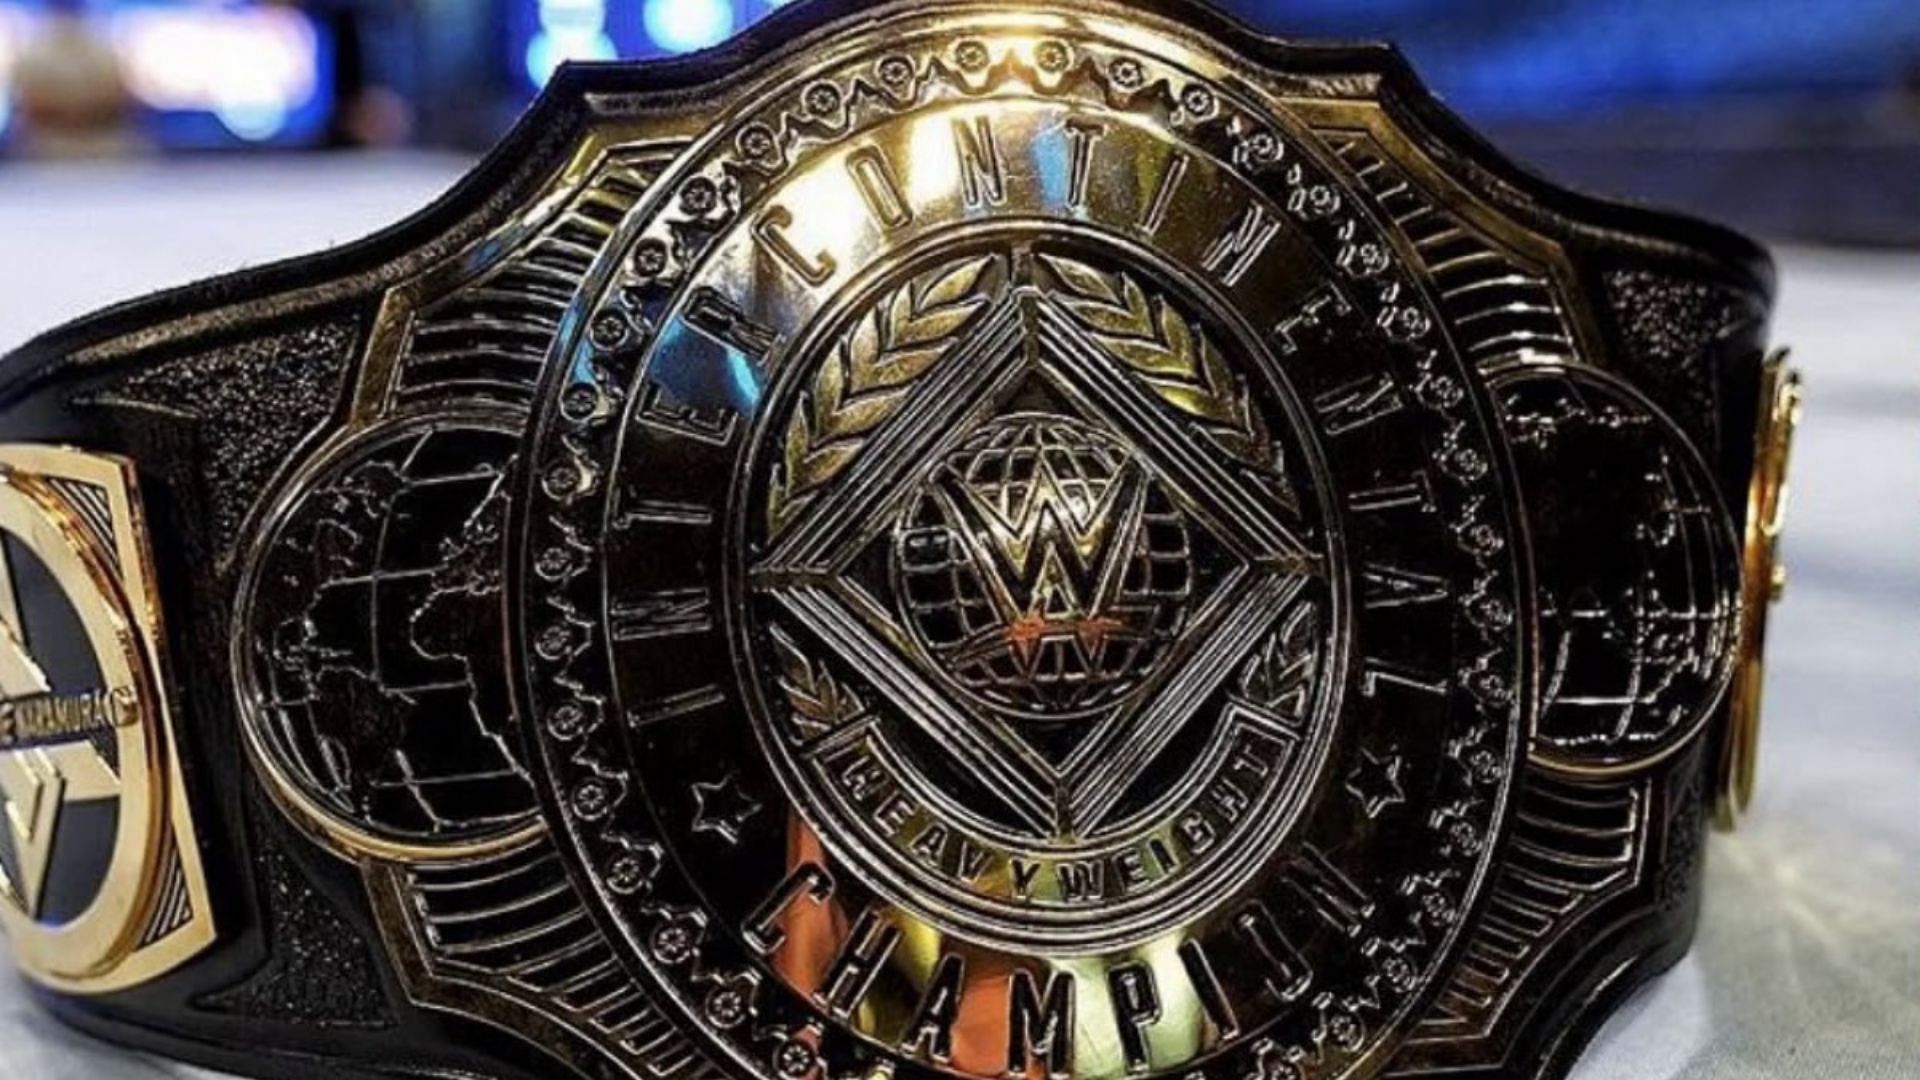 The Intercontinental Championship is one of WWE